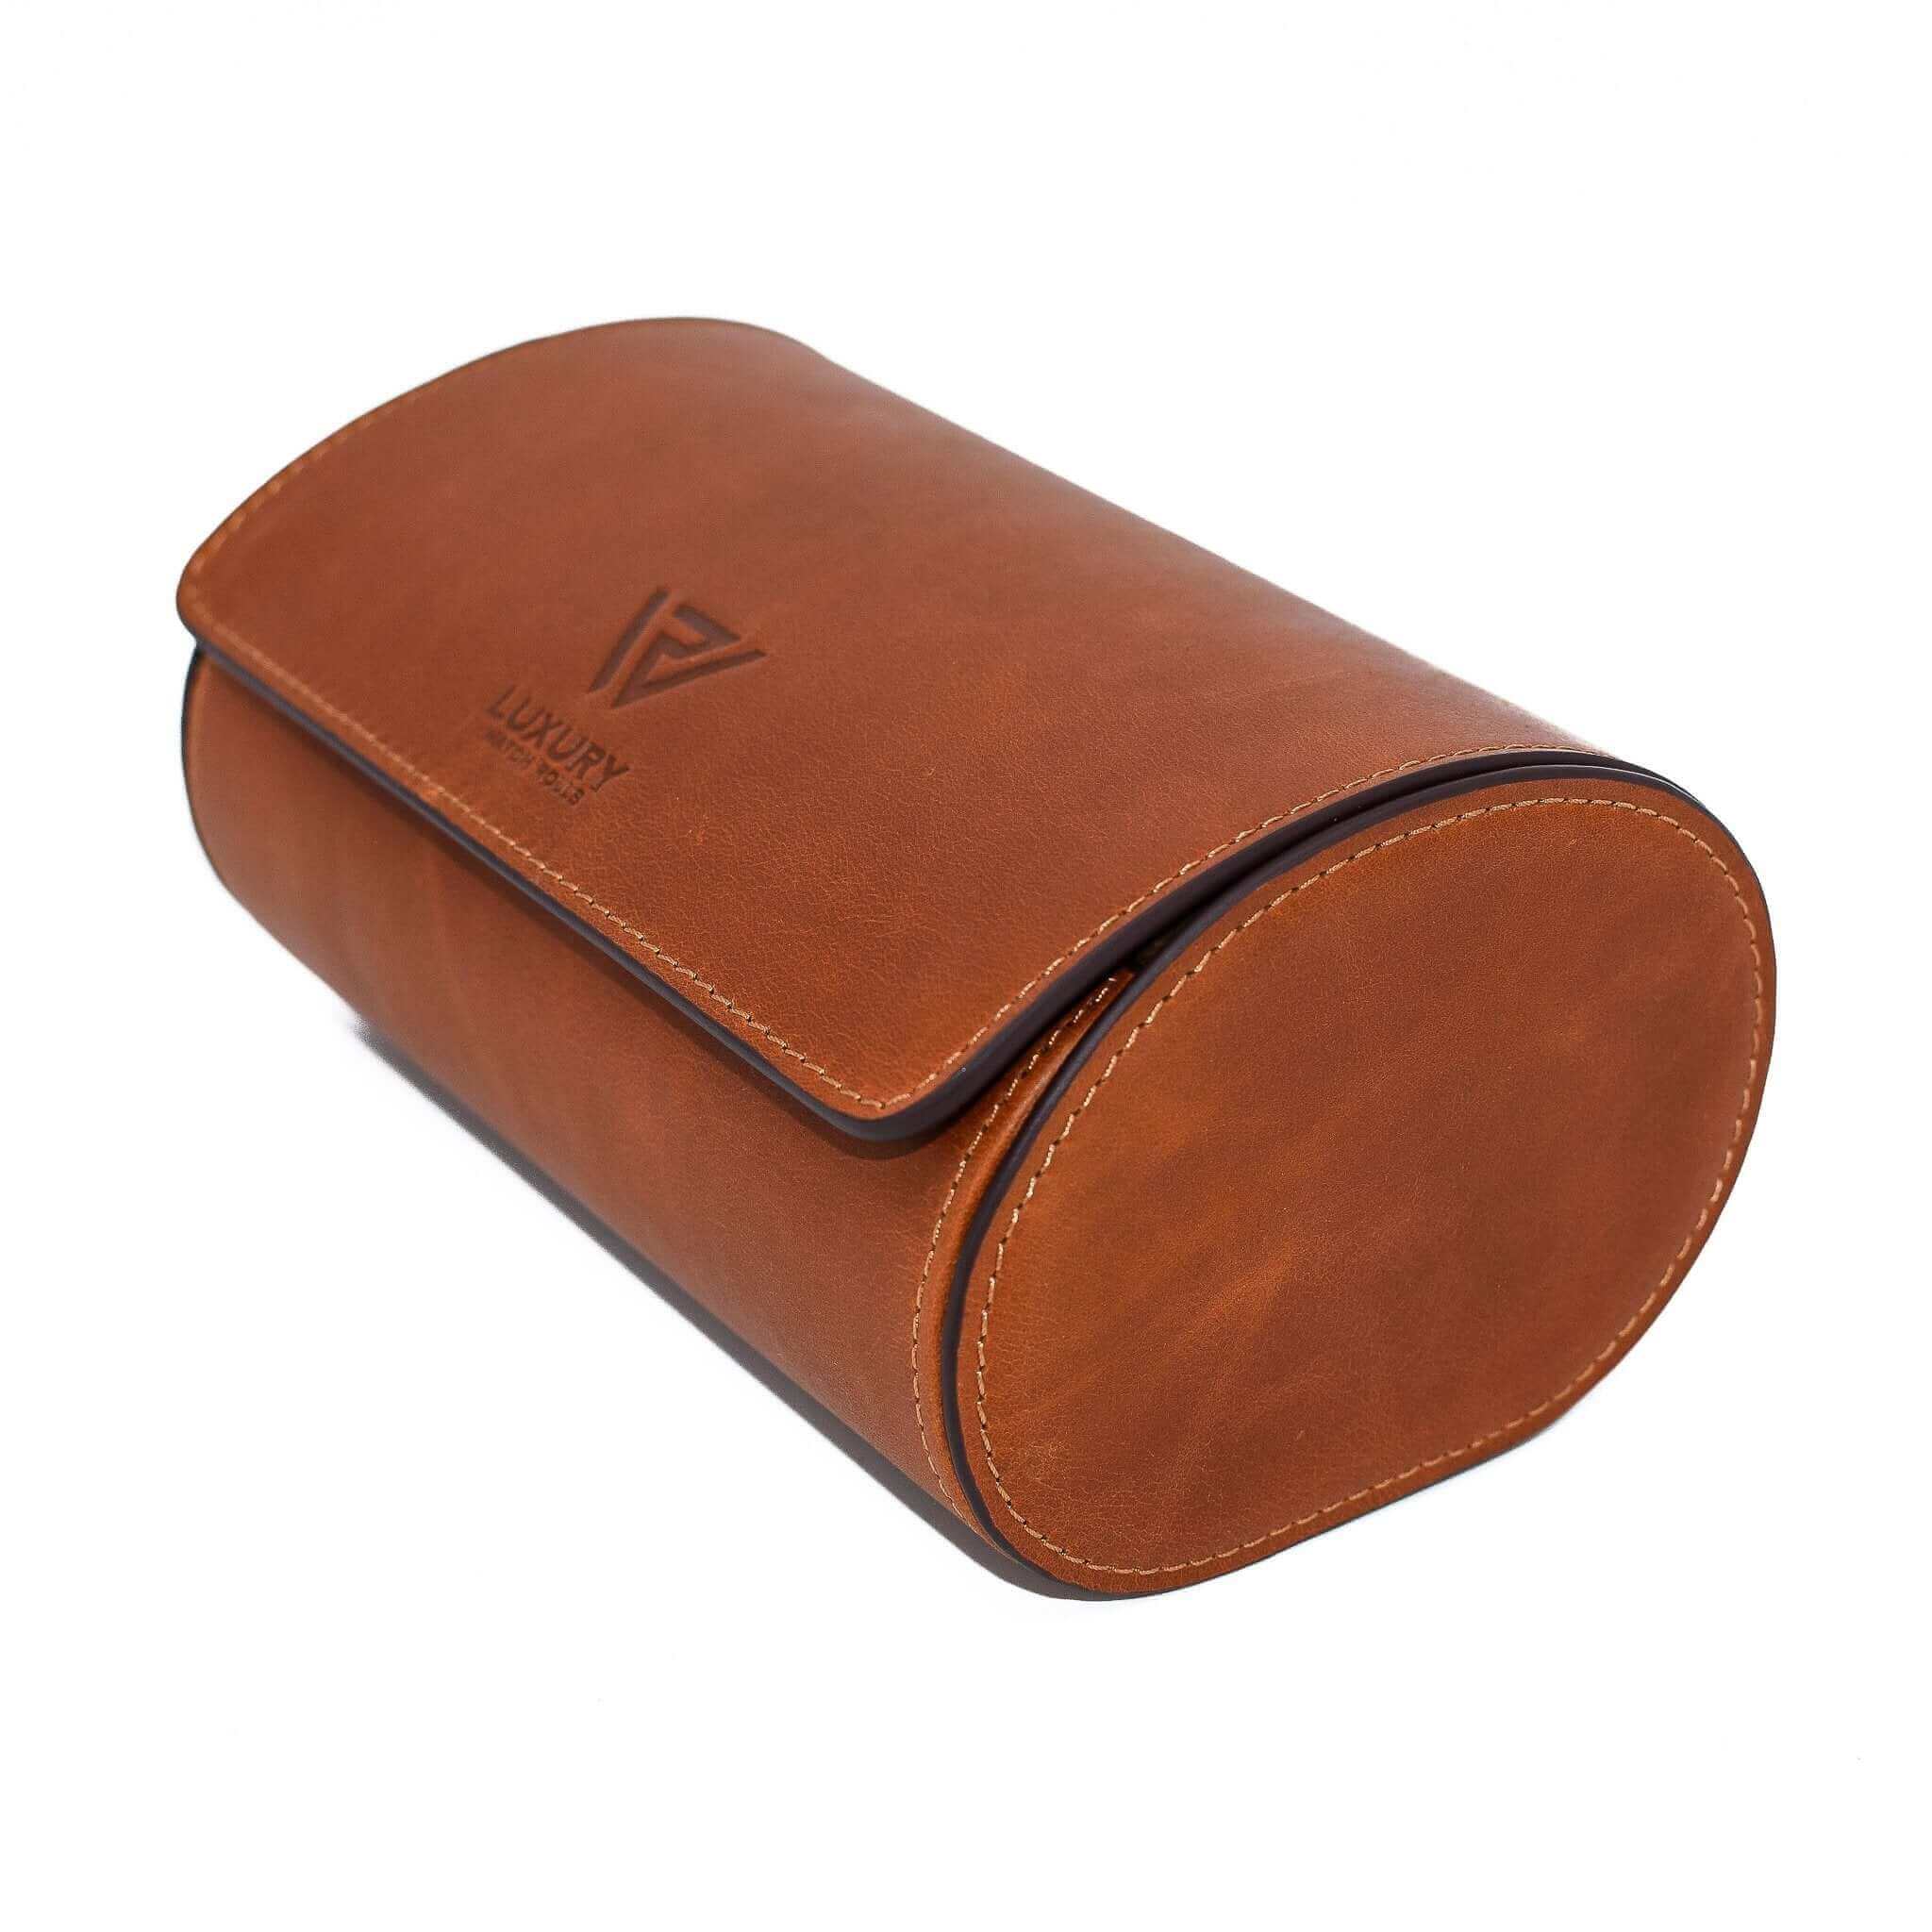 A side view of Luxury Watch Roll's double slot, vintage brown leather watch roll for two watch storage.